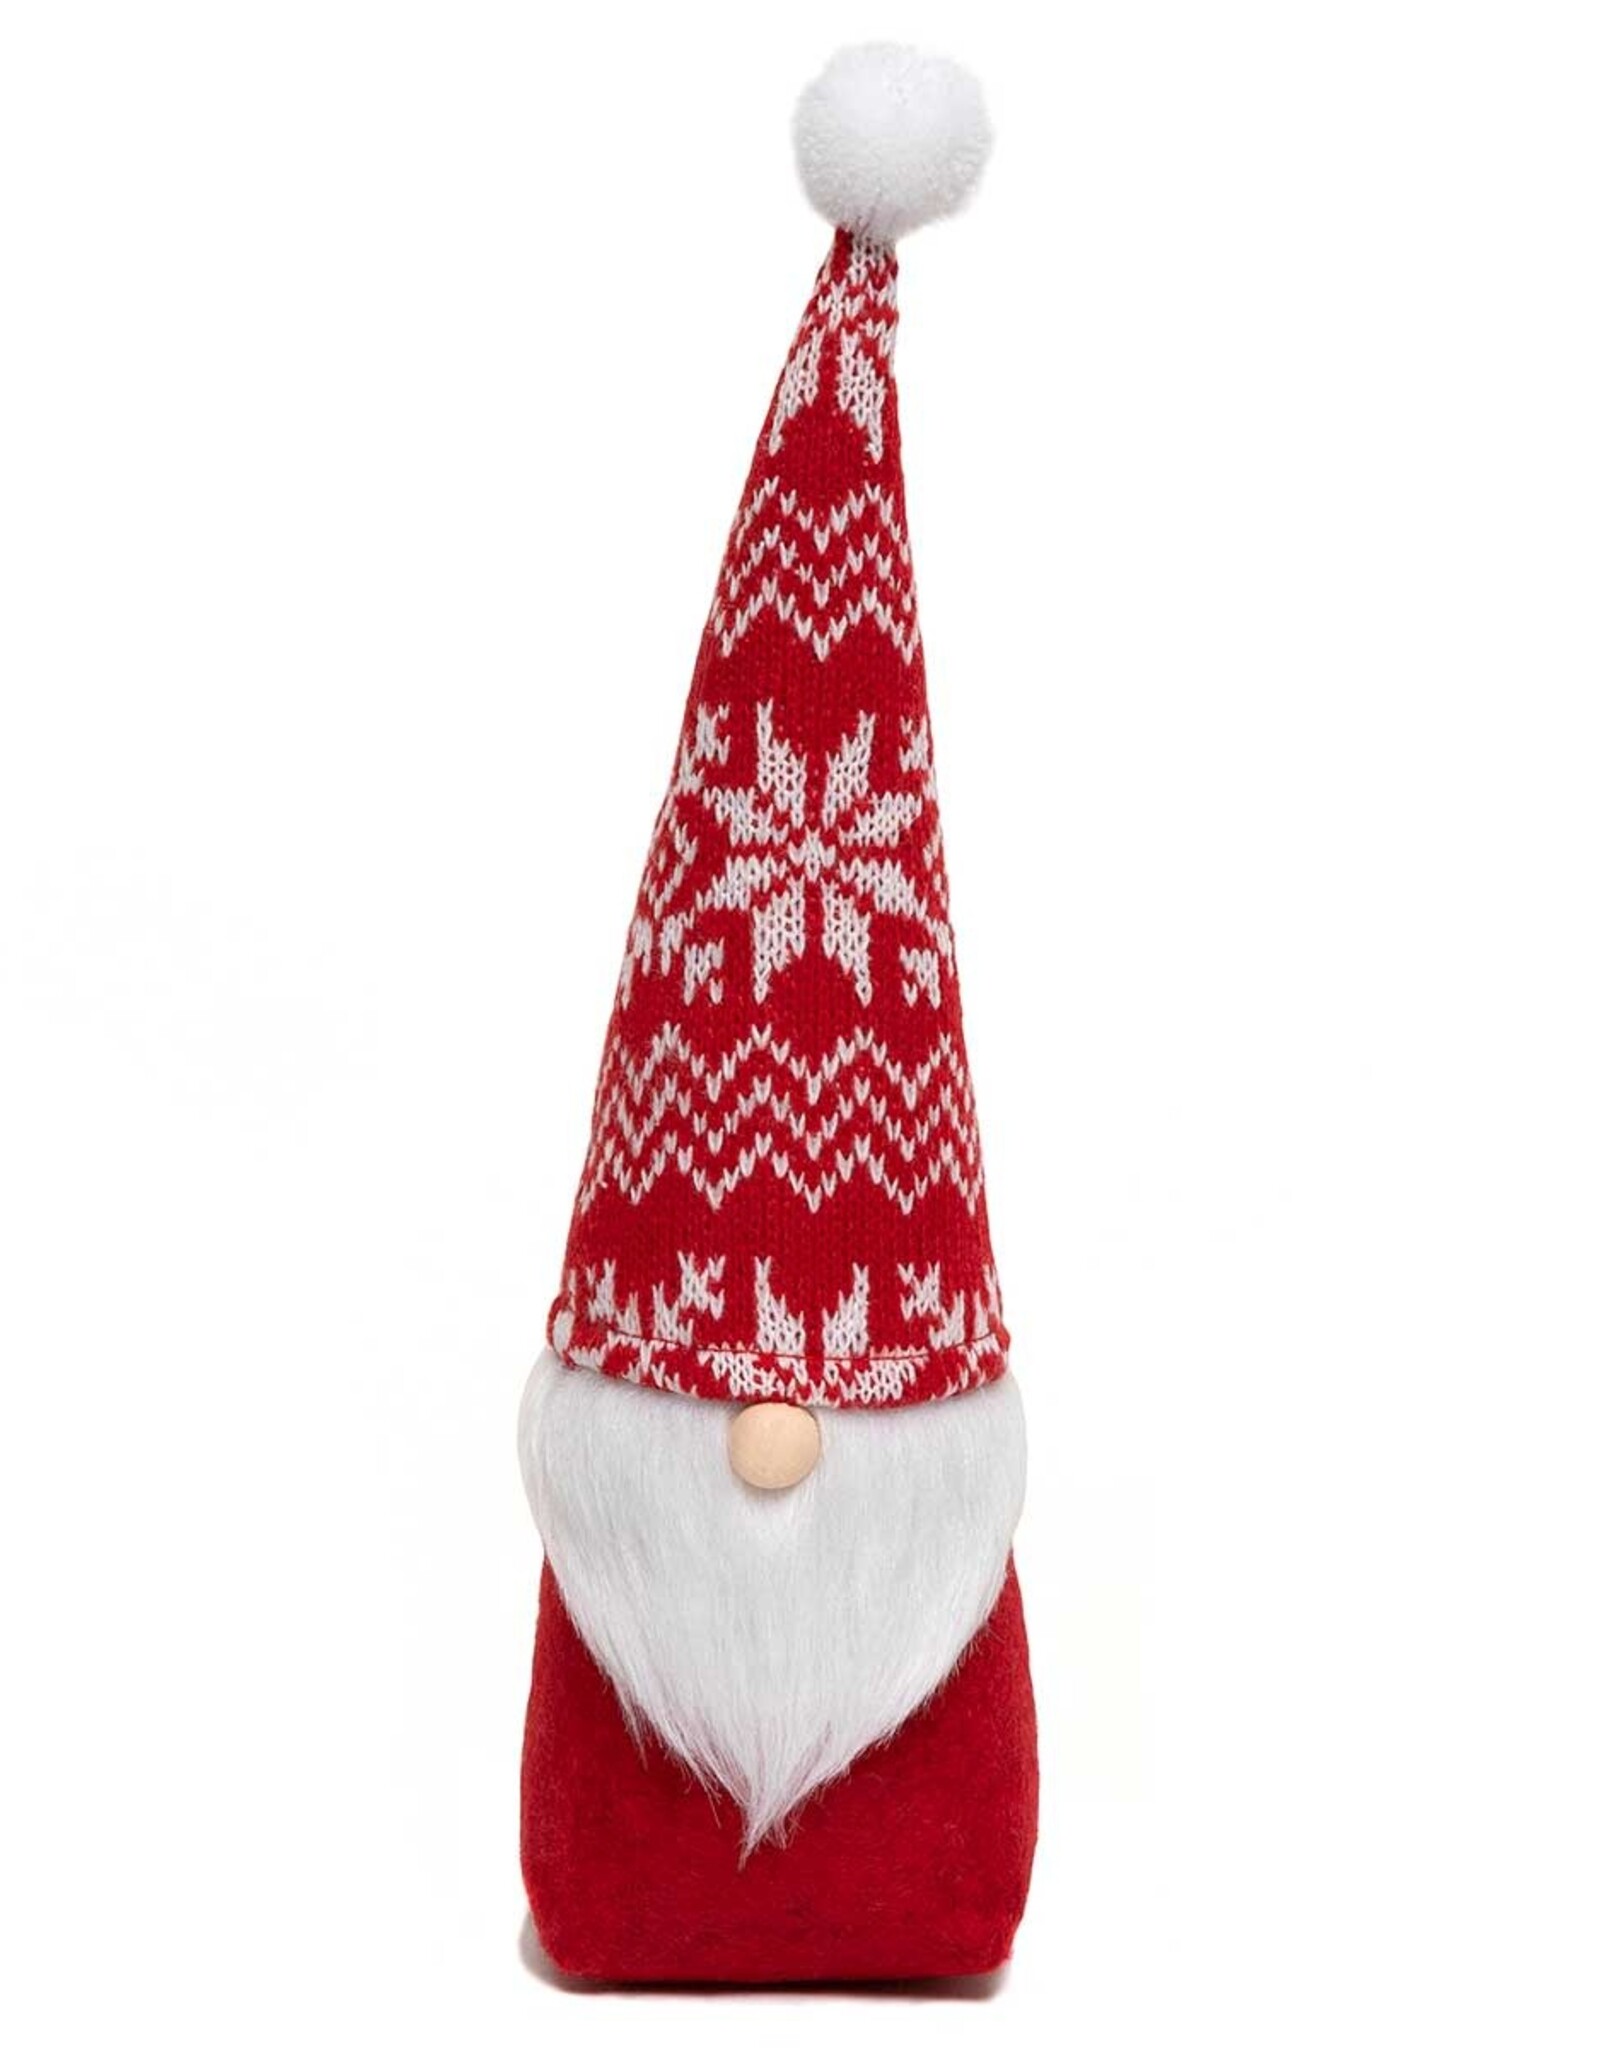 Meravic SALE 11.5" Tomte Holiday Gnome w/ Sweater Hat